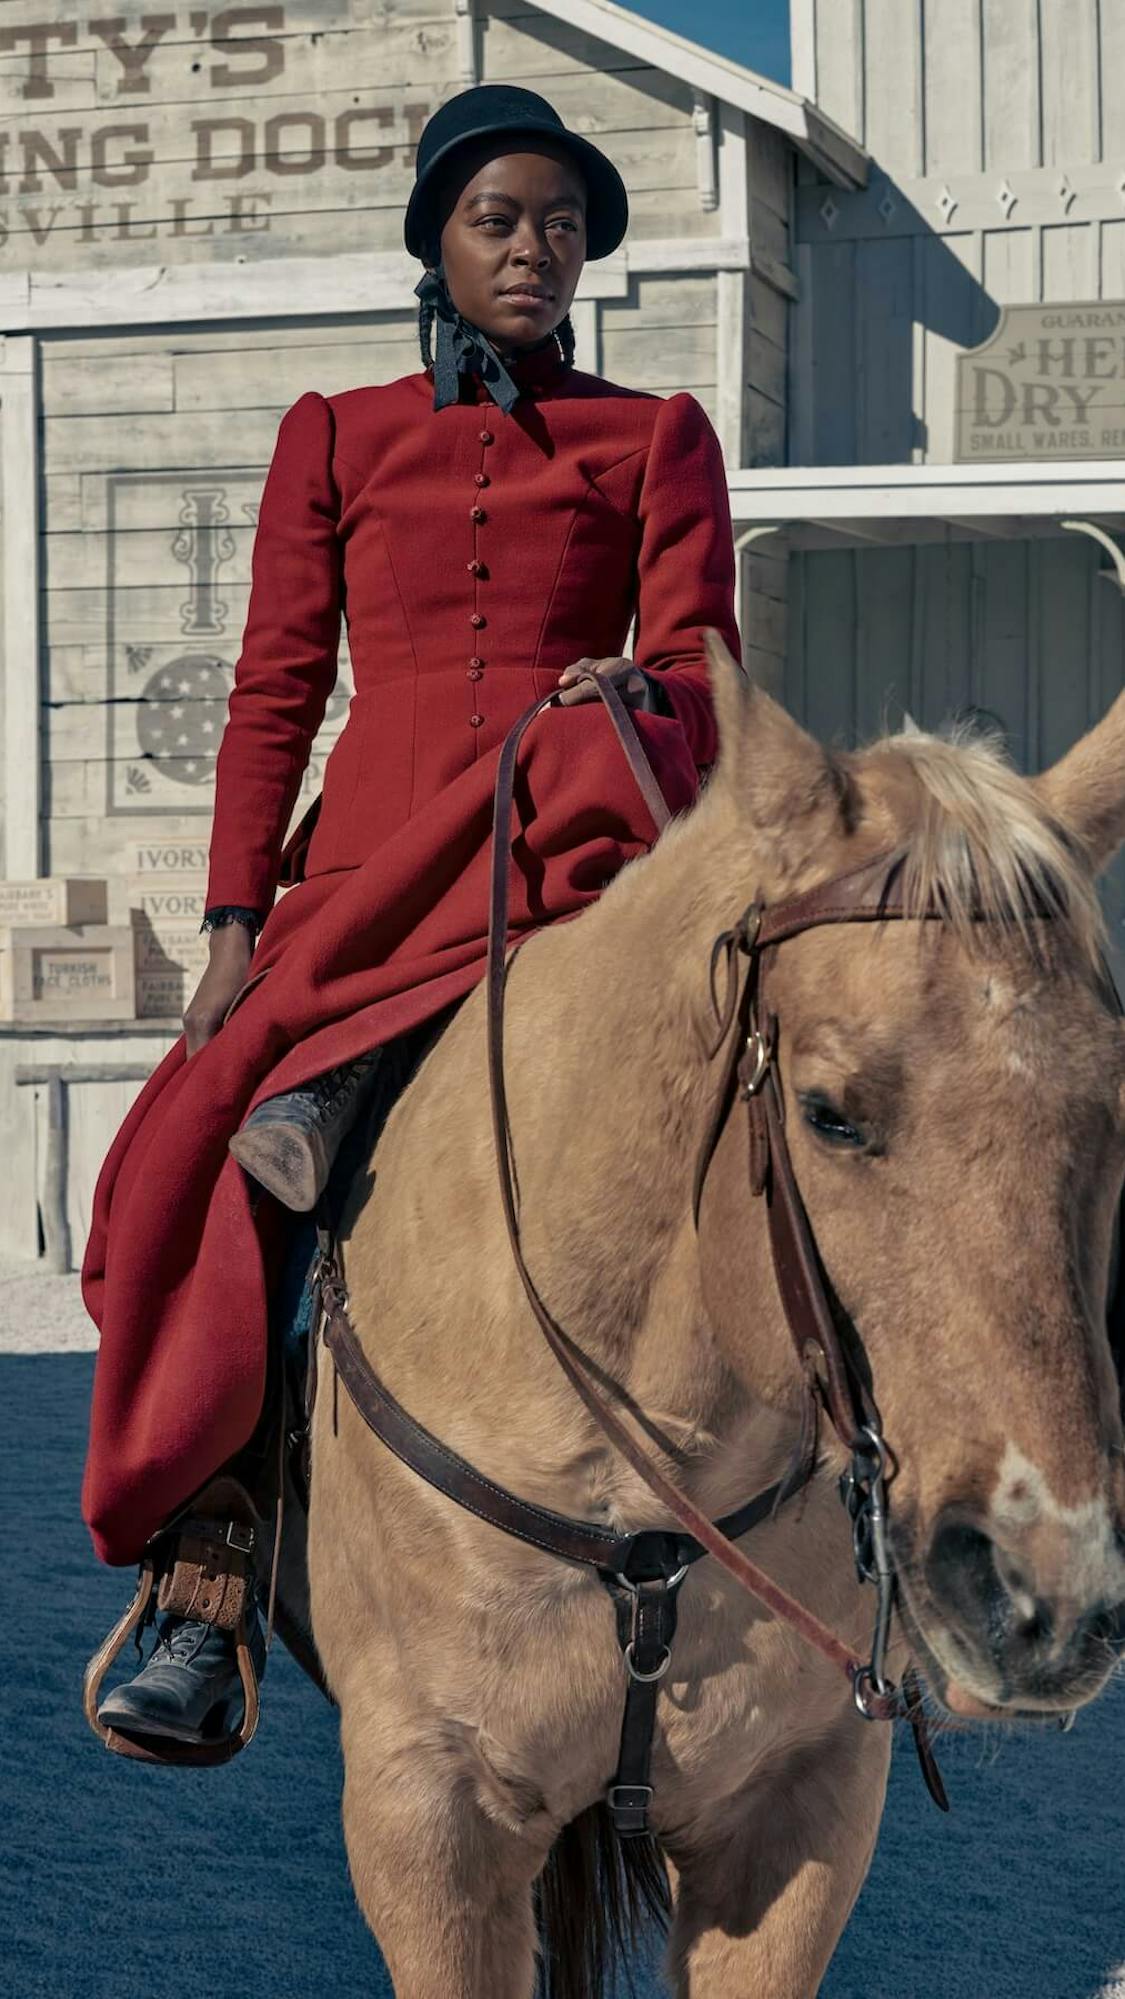 Cuffee (Danielle Deadwyler) wears a long red dress with little buttons and a black hat. She rides a brown horse.